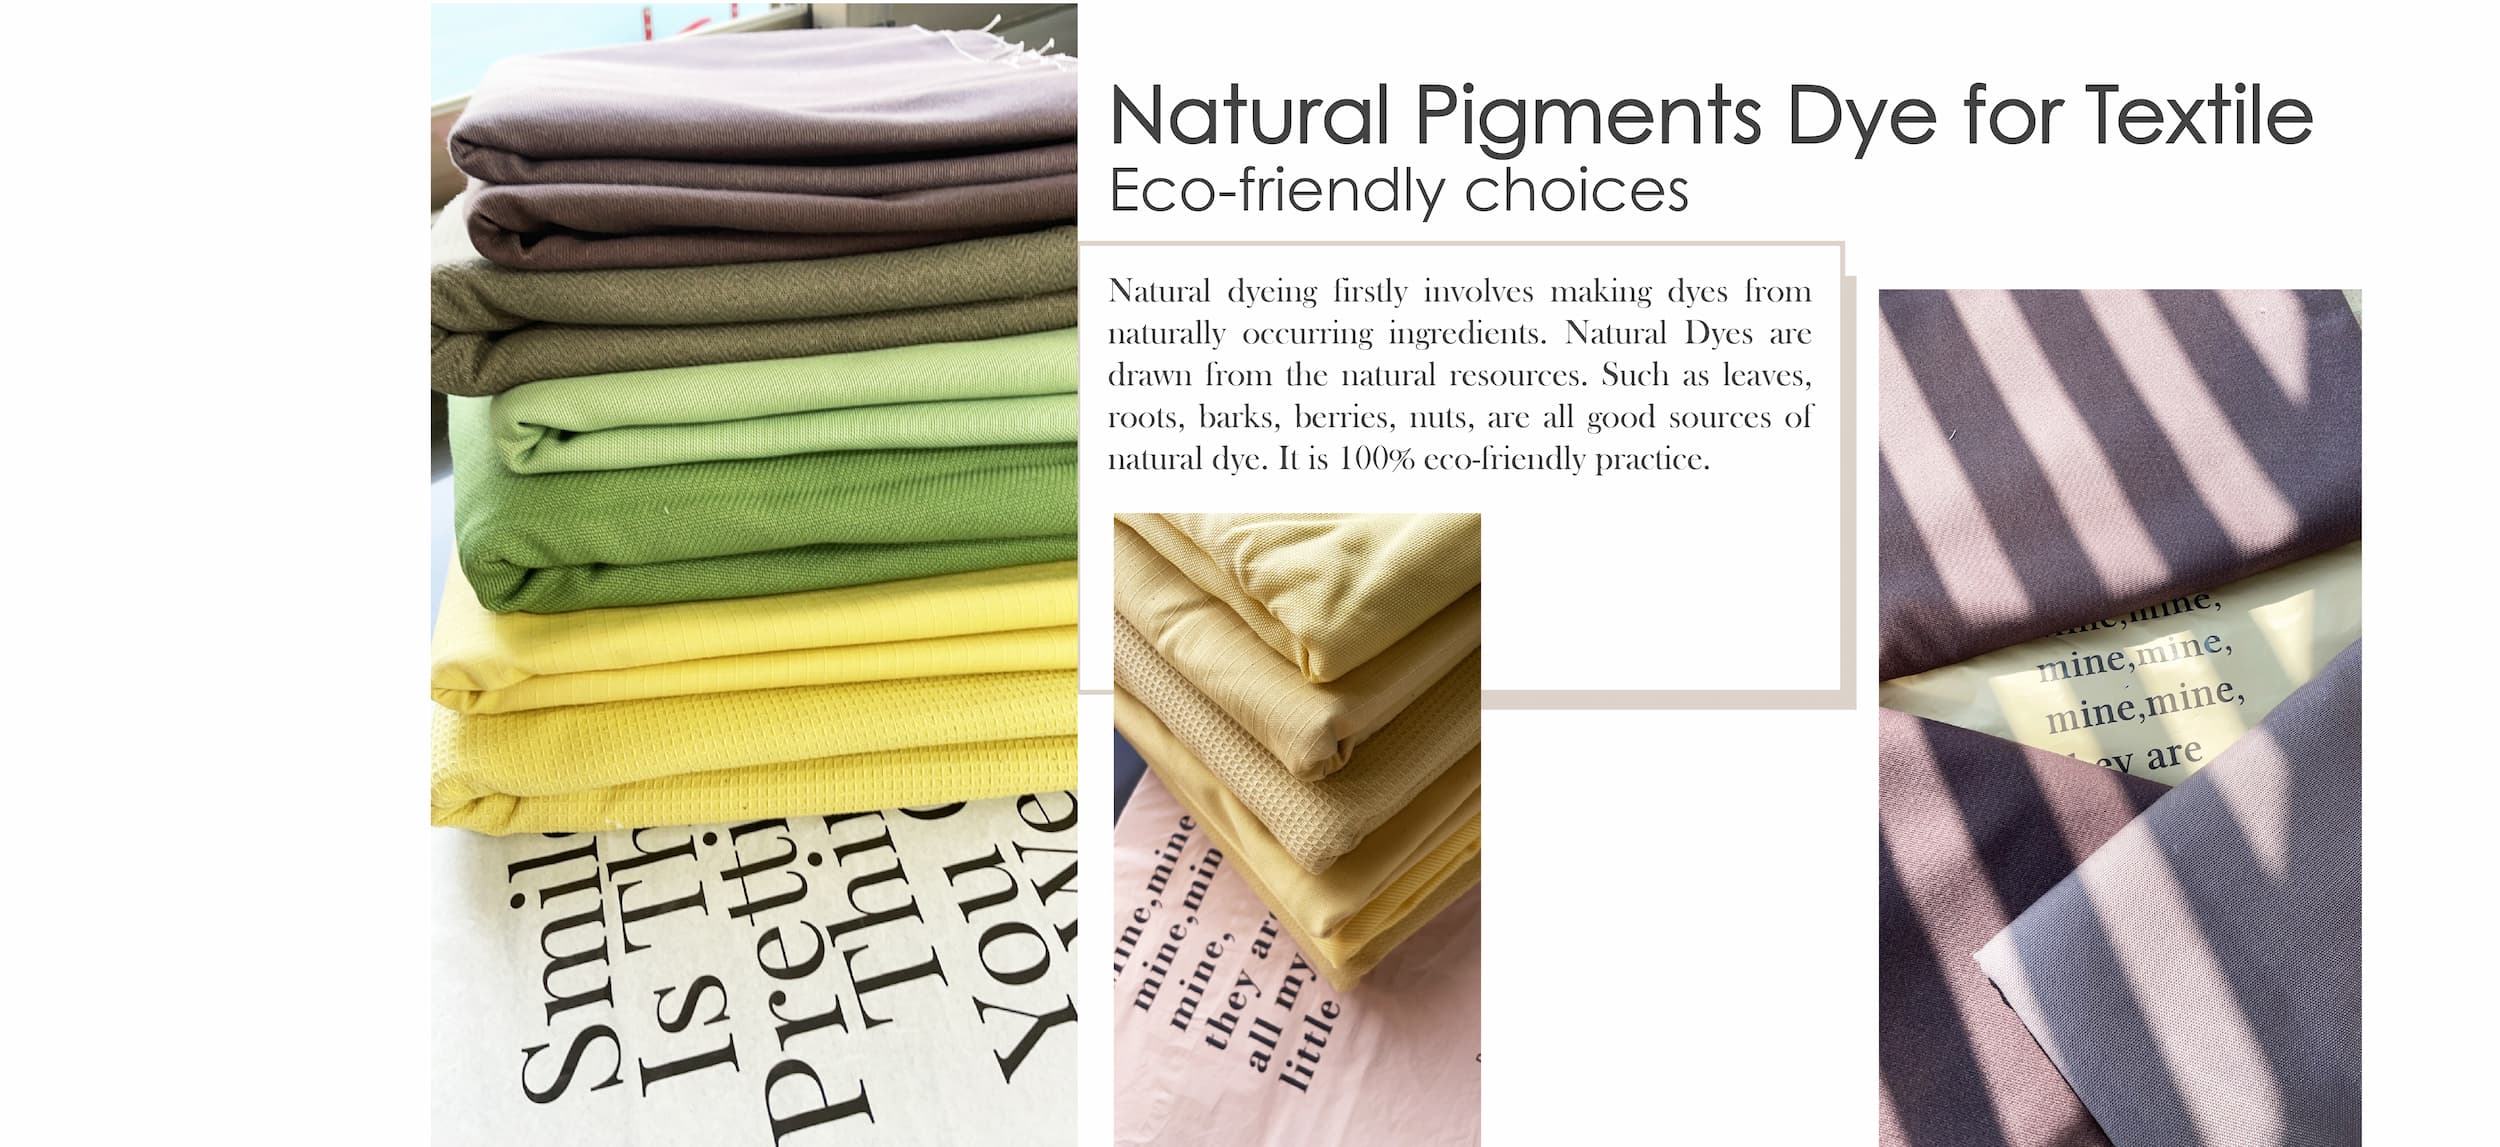 Natural Pigments Dye for Textile